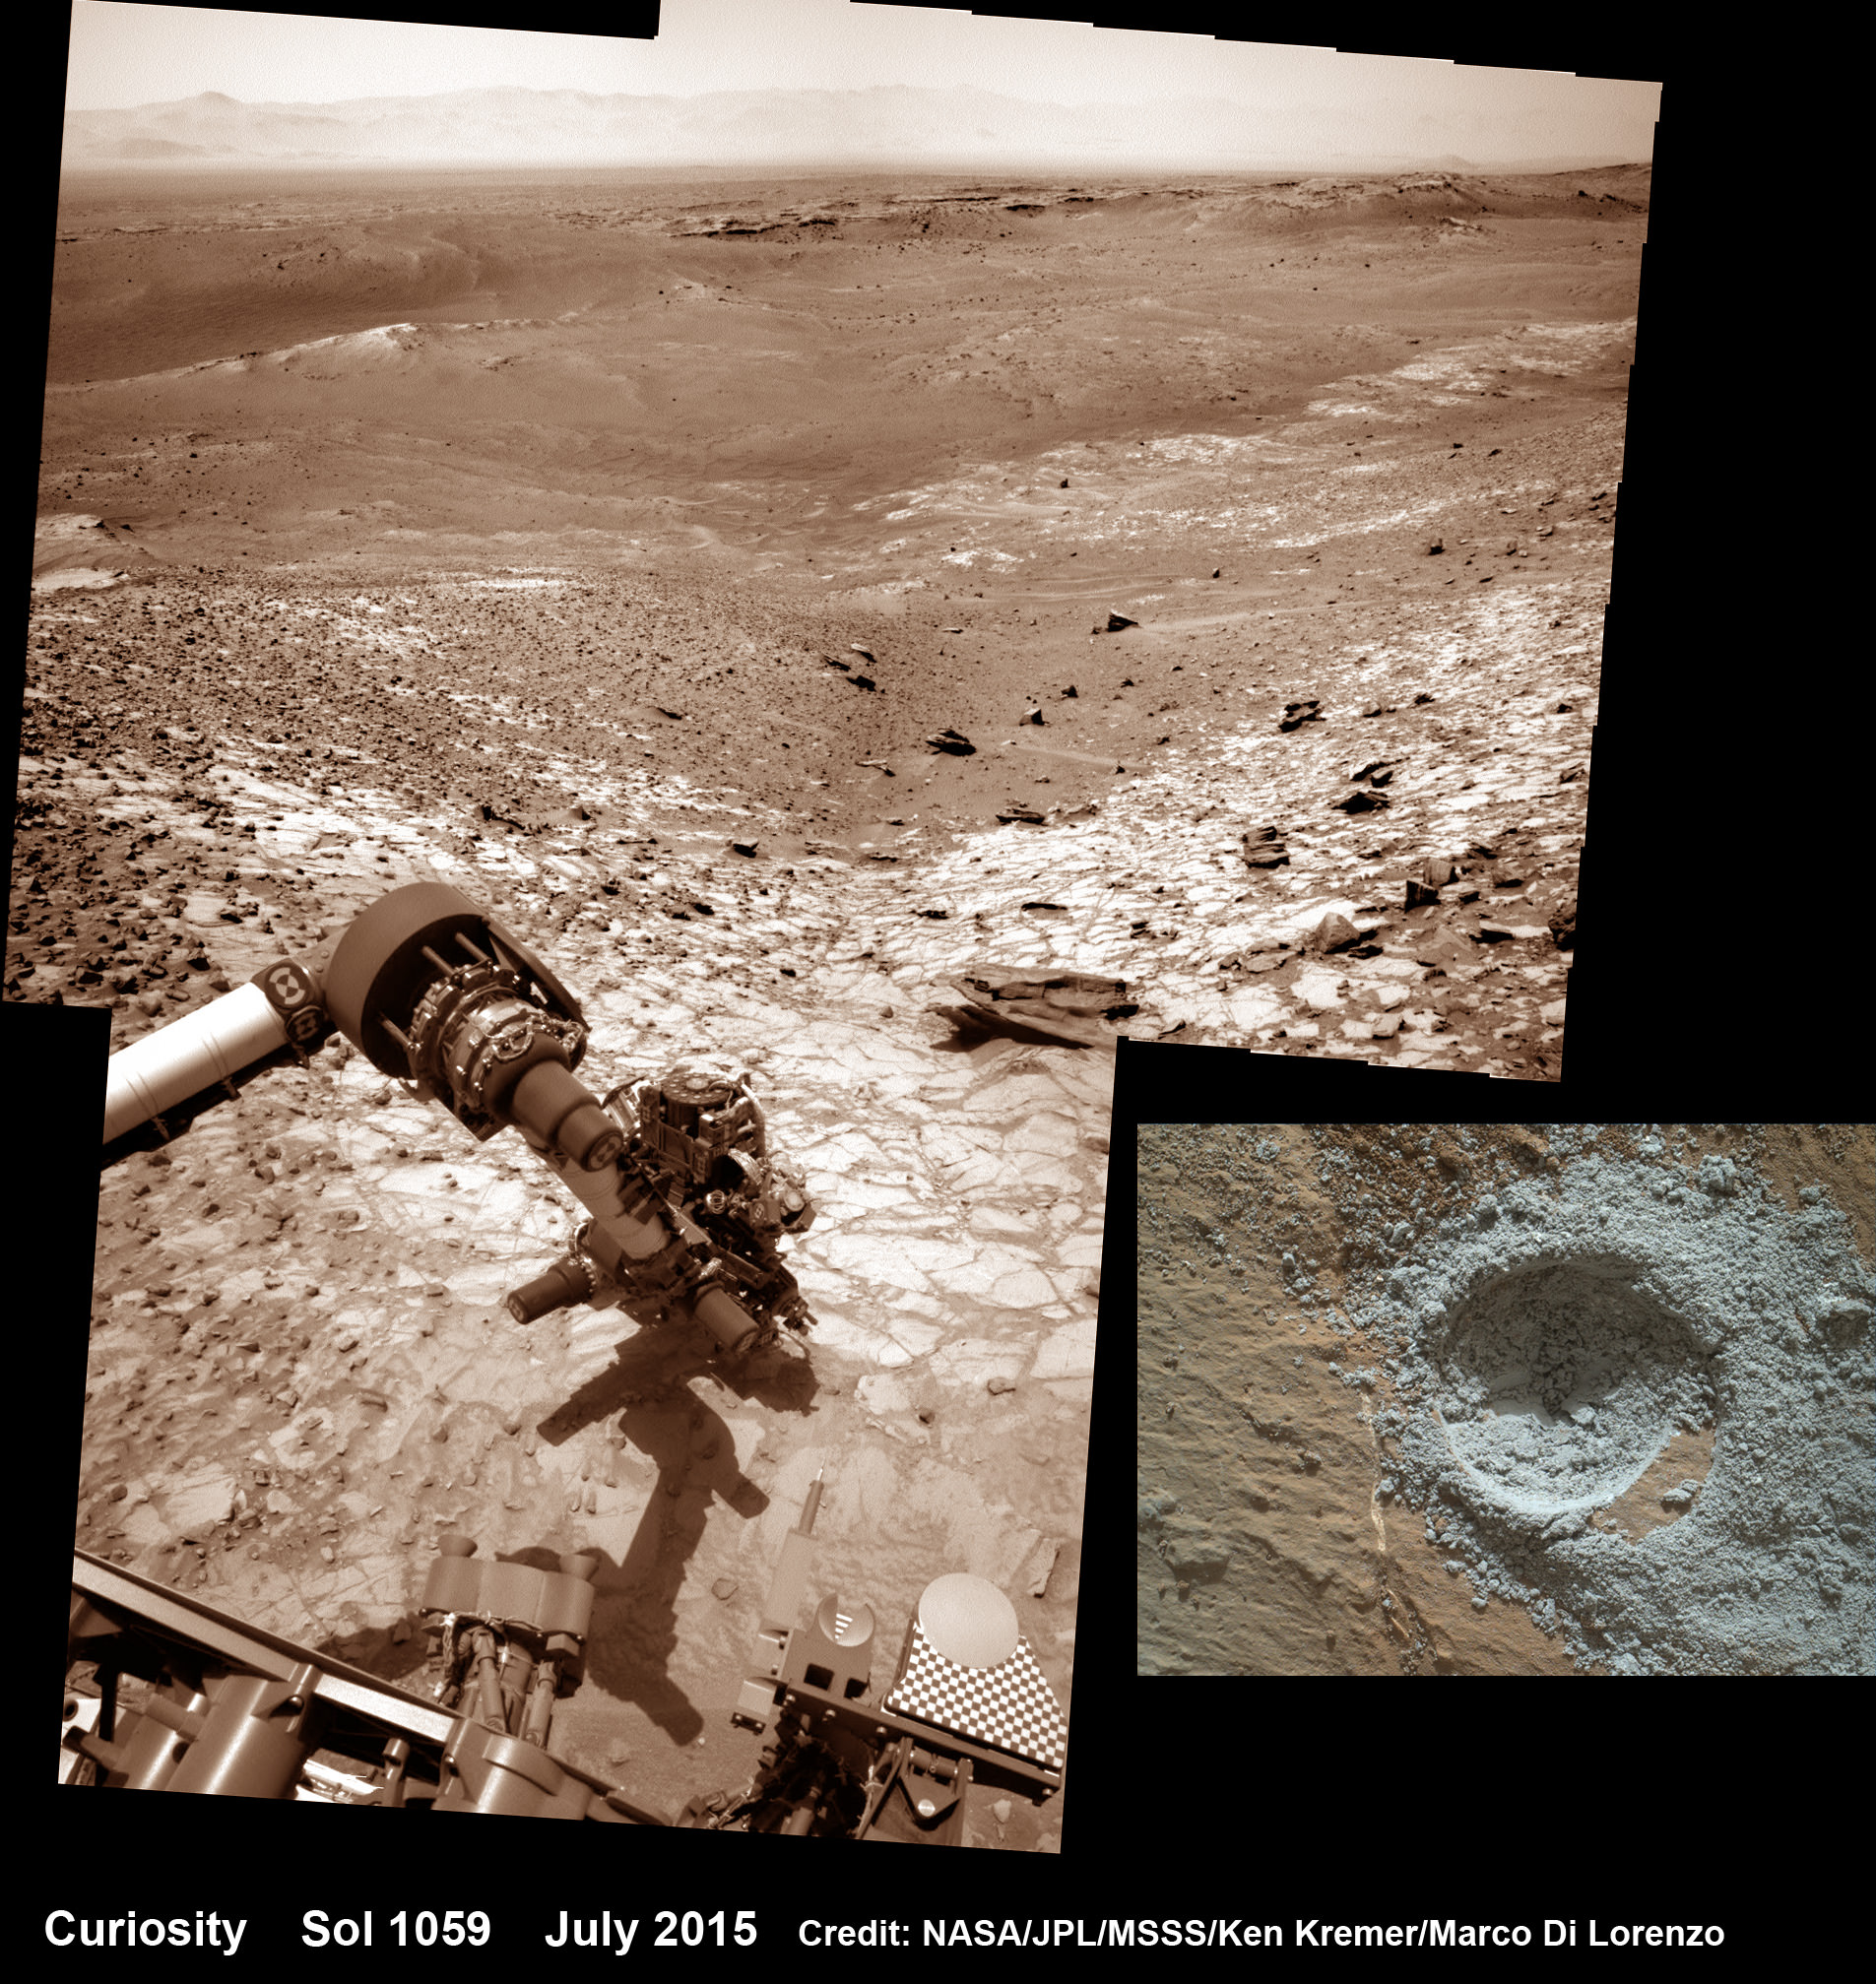 Curiosity conducts test drill at “Buckskin” rock target at bright toned “Lion” outcrop on the lower region of Mount Sharp on Mars.   Gale crater rim seen in the distant background, in this composite mosaic of navcam raw images taken to Sol 1059, July 30, 2015.  Navcam camera raw images stitched and colorized. Credit:  NASA/JPL-Caltech/Ken Kremer/kenkremer.com/Marco Di Lorenzo  Inset: MAHLI camera up close image of  test drill at “Buckskin” rock target.  Credit: NASA/JPL-Caltech/MSSS